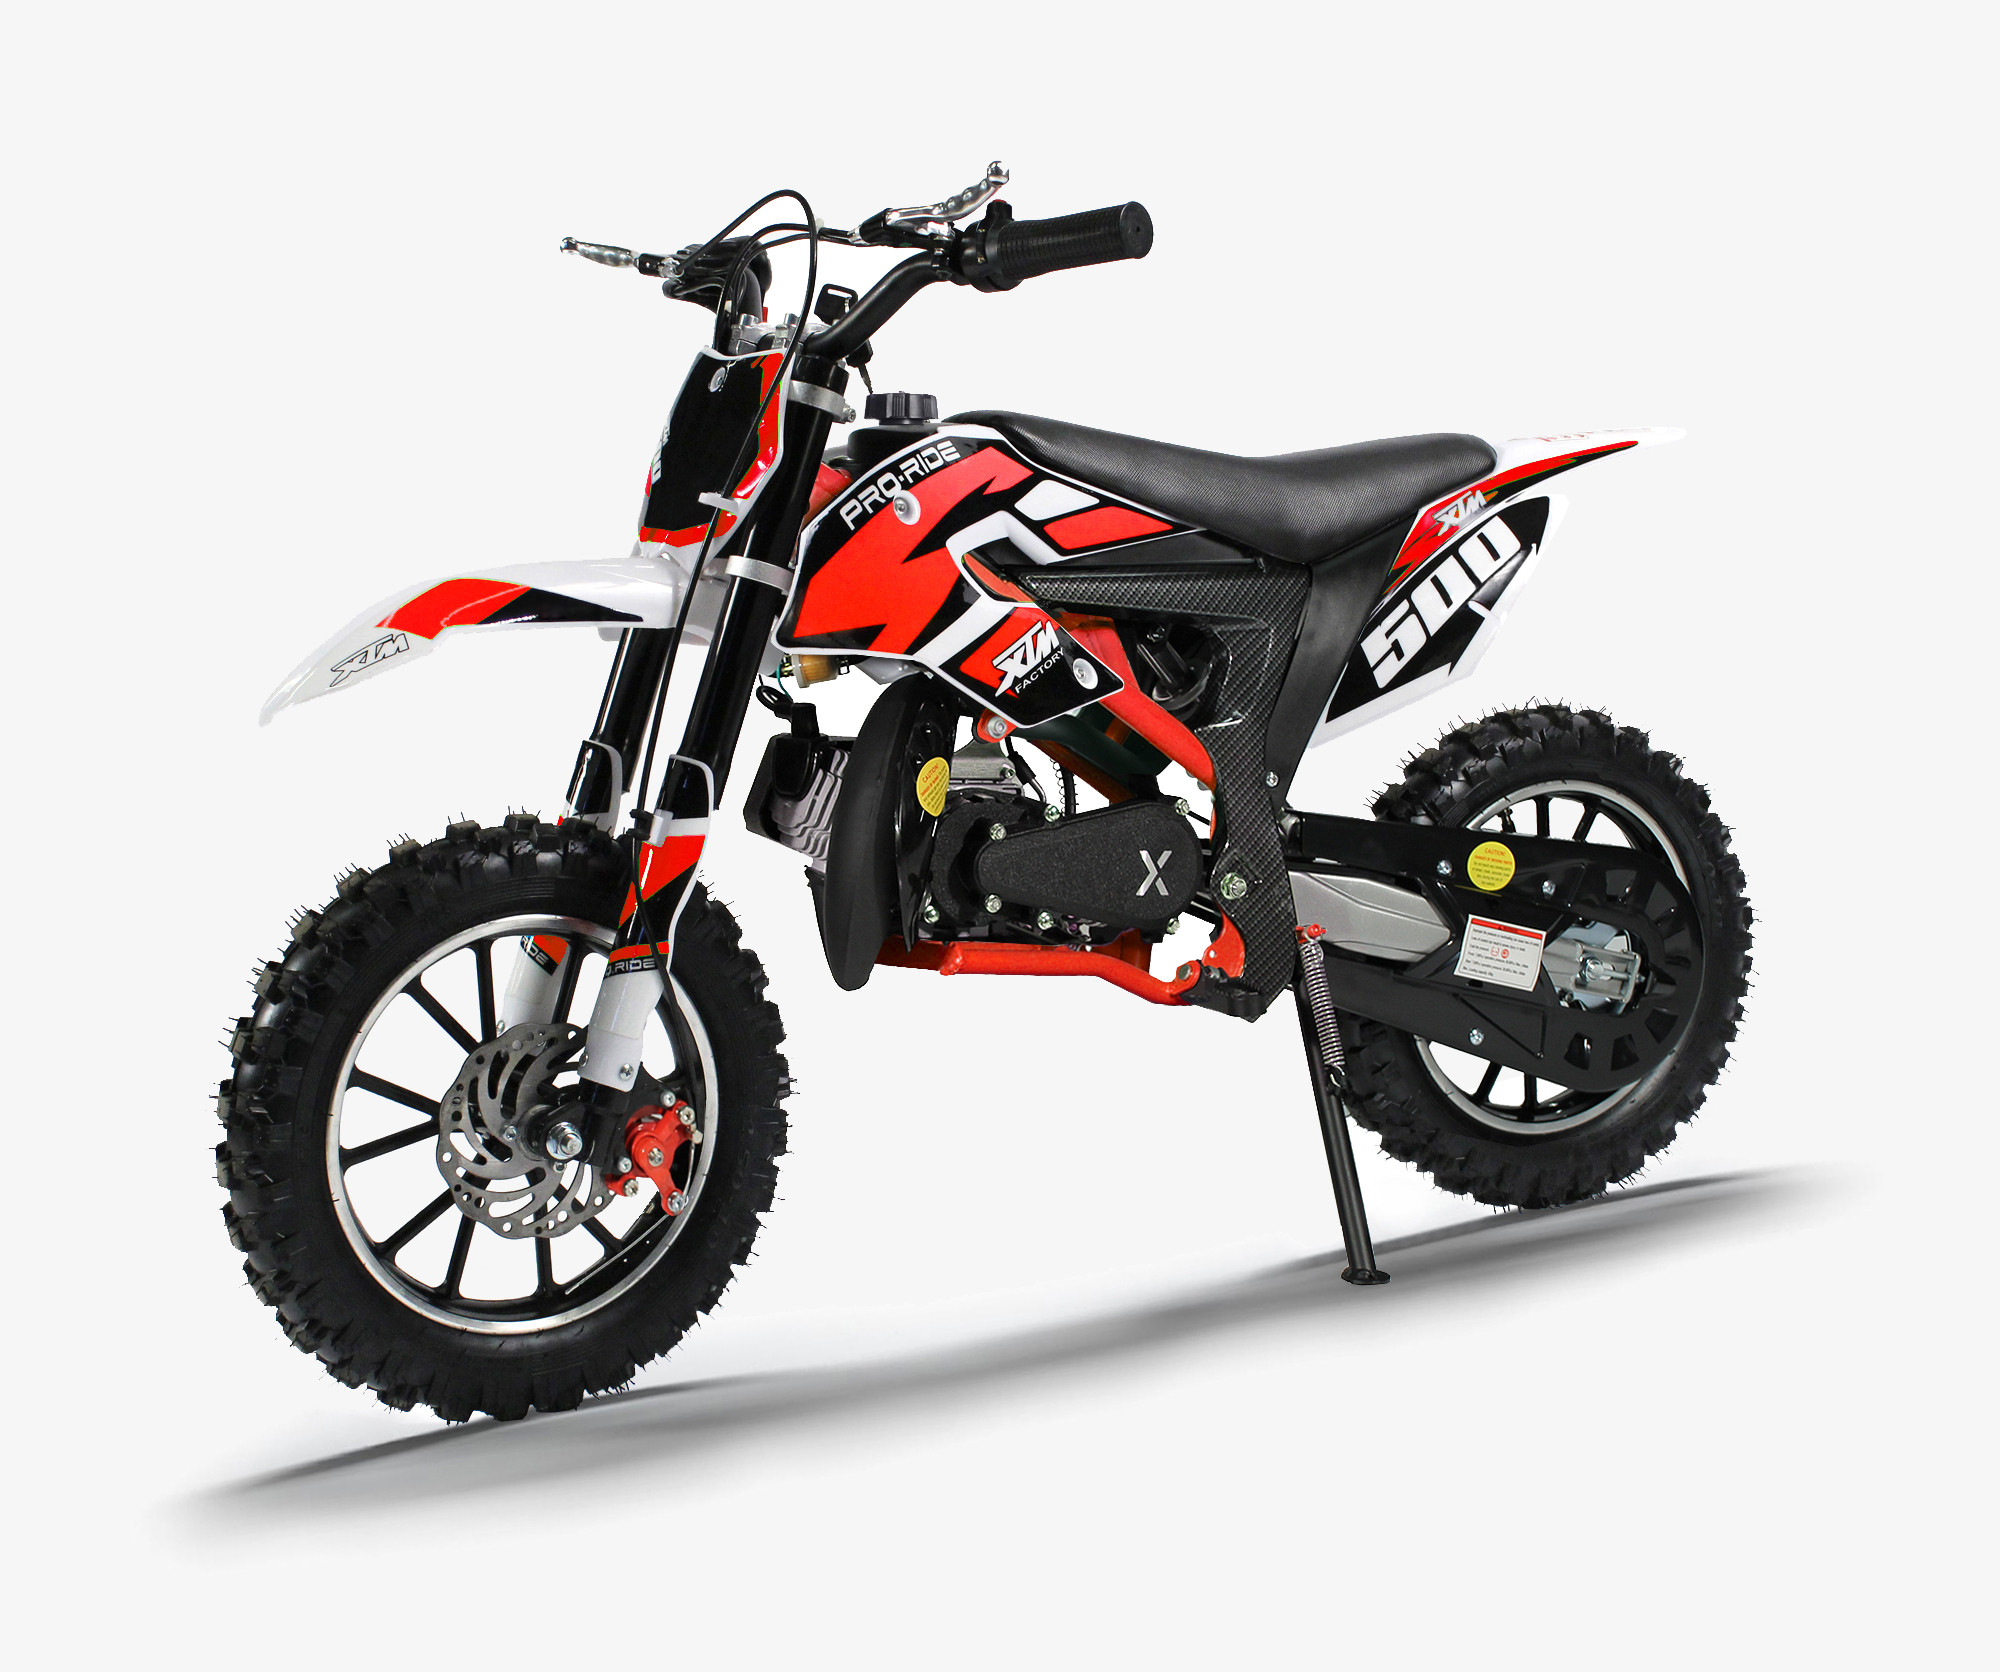 XTM PRO-RIDER 50cc DIRT BIKE COLOUR-CODED WHITE RED